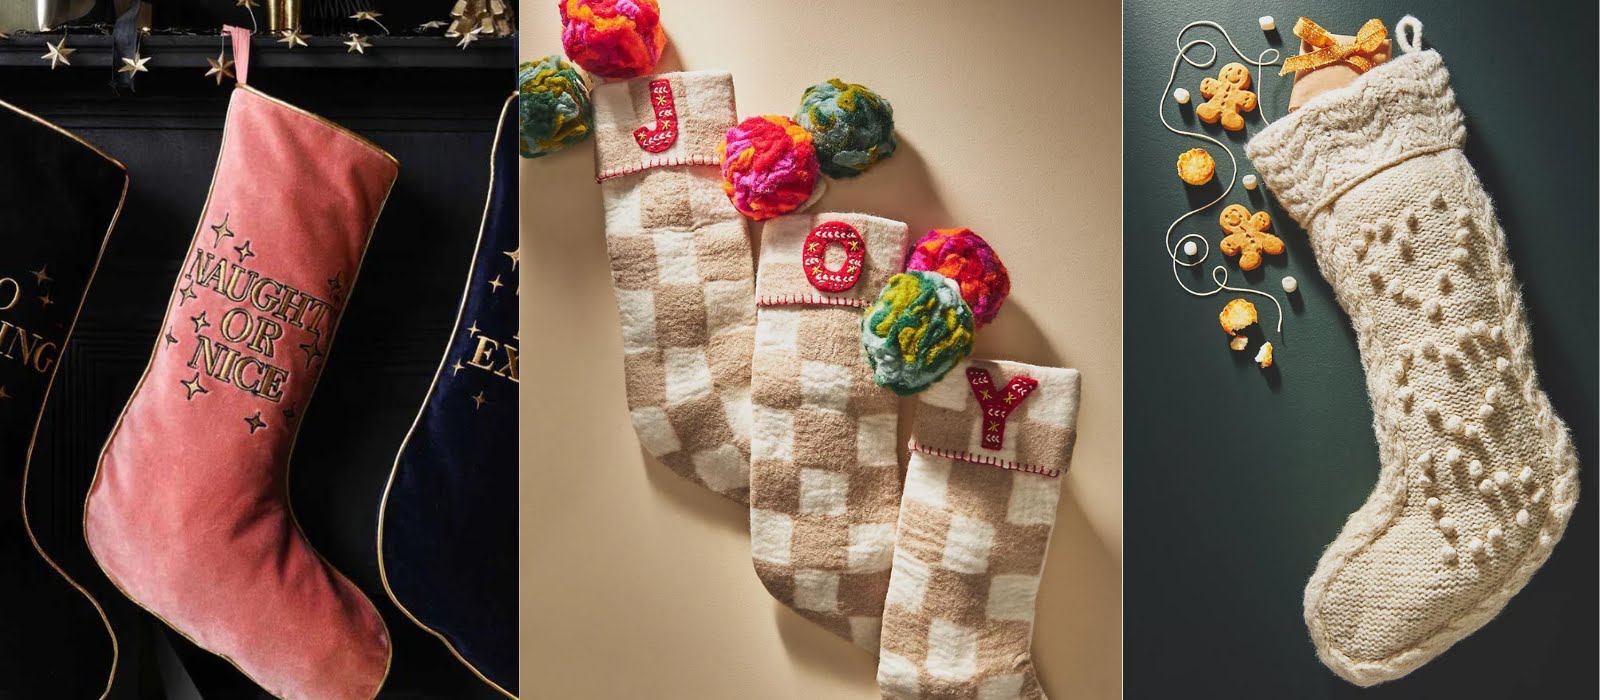 16 festive Christmas stockings you won’t want to take down in a hurry